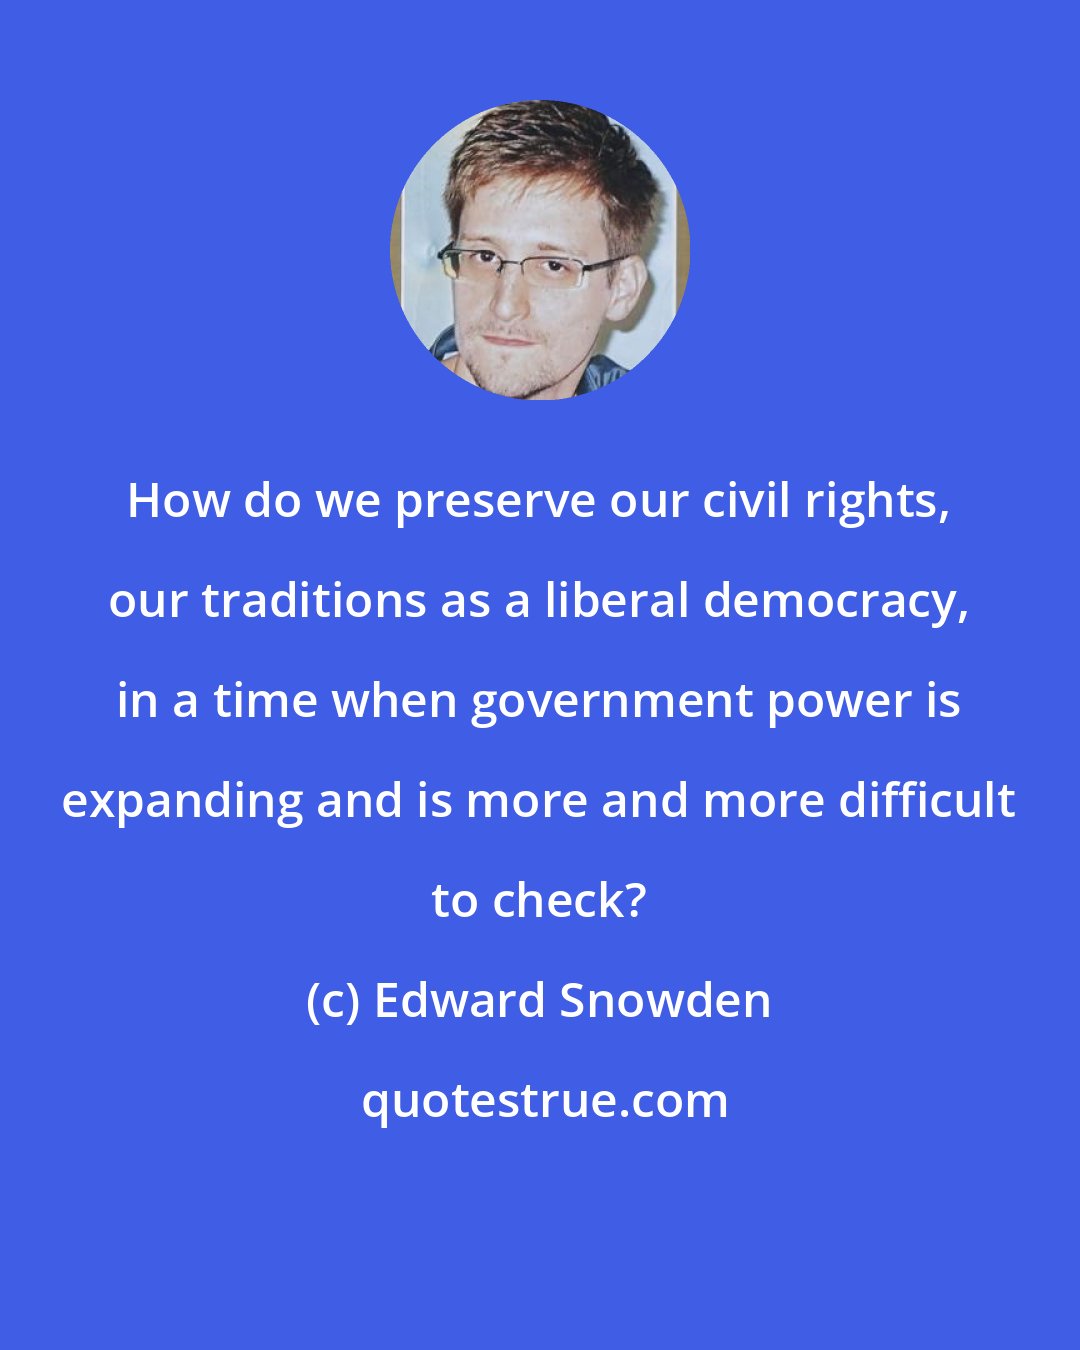 Edward Snowden: How do we preserve our civil rights, our traditions as a liberal democracy, in a time when government power is expanding and is more and more difficult to check?